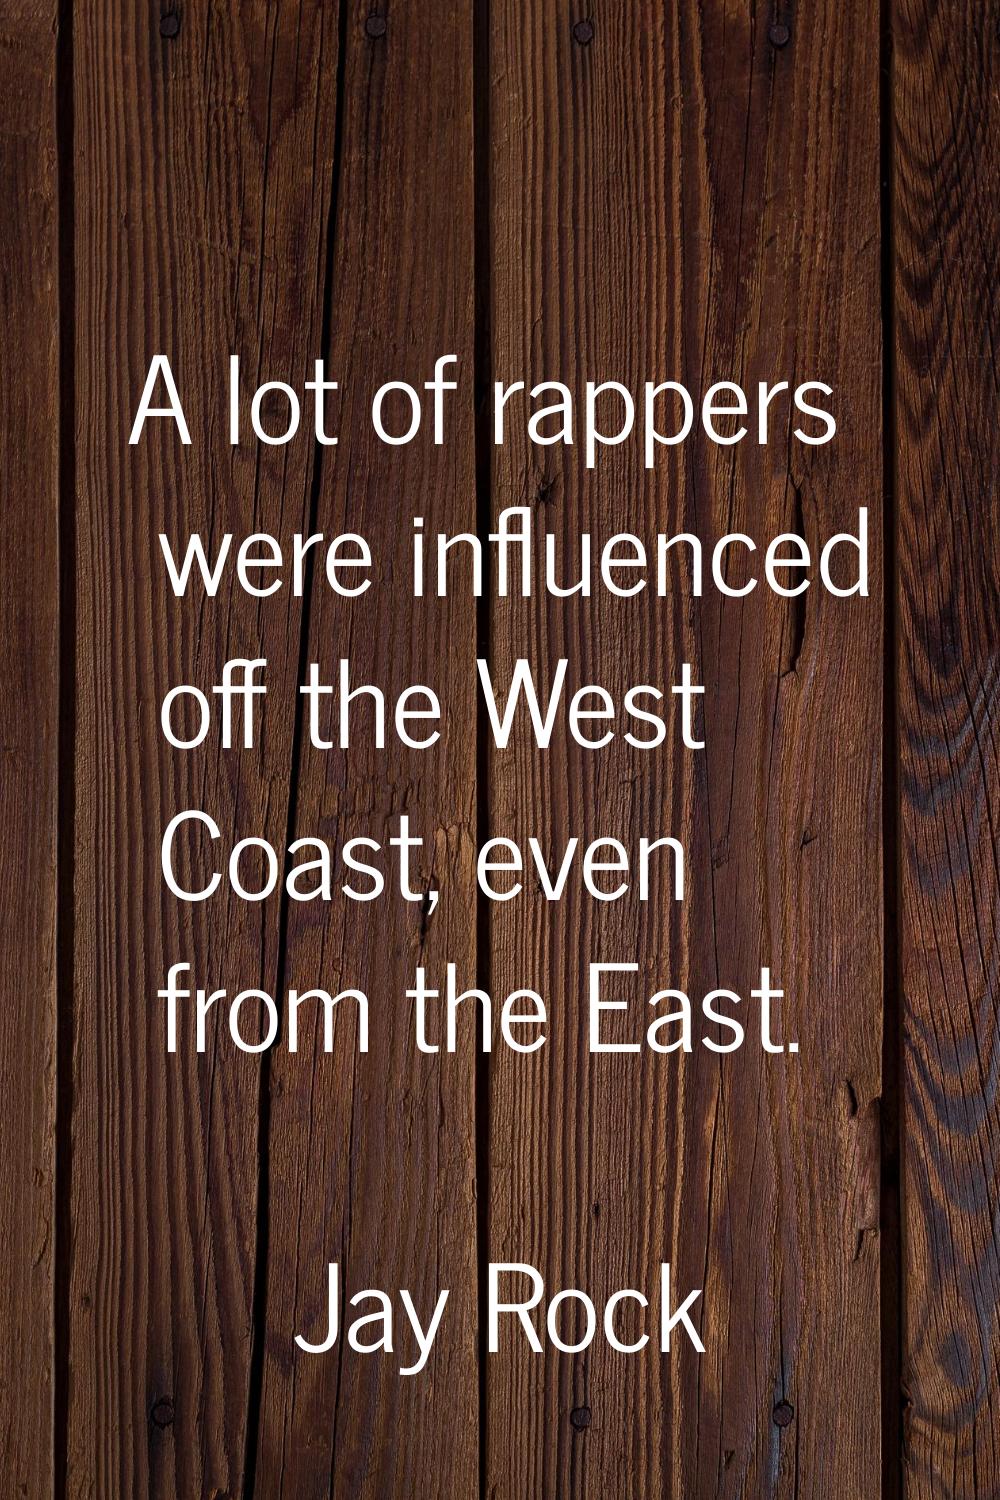 A lot of rappers were influenced off the West Coast, even from the East.